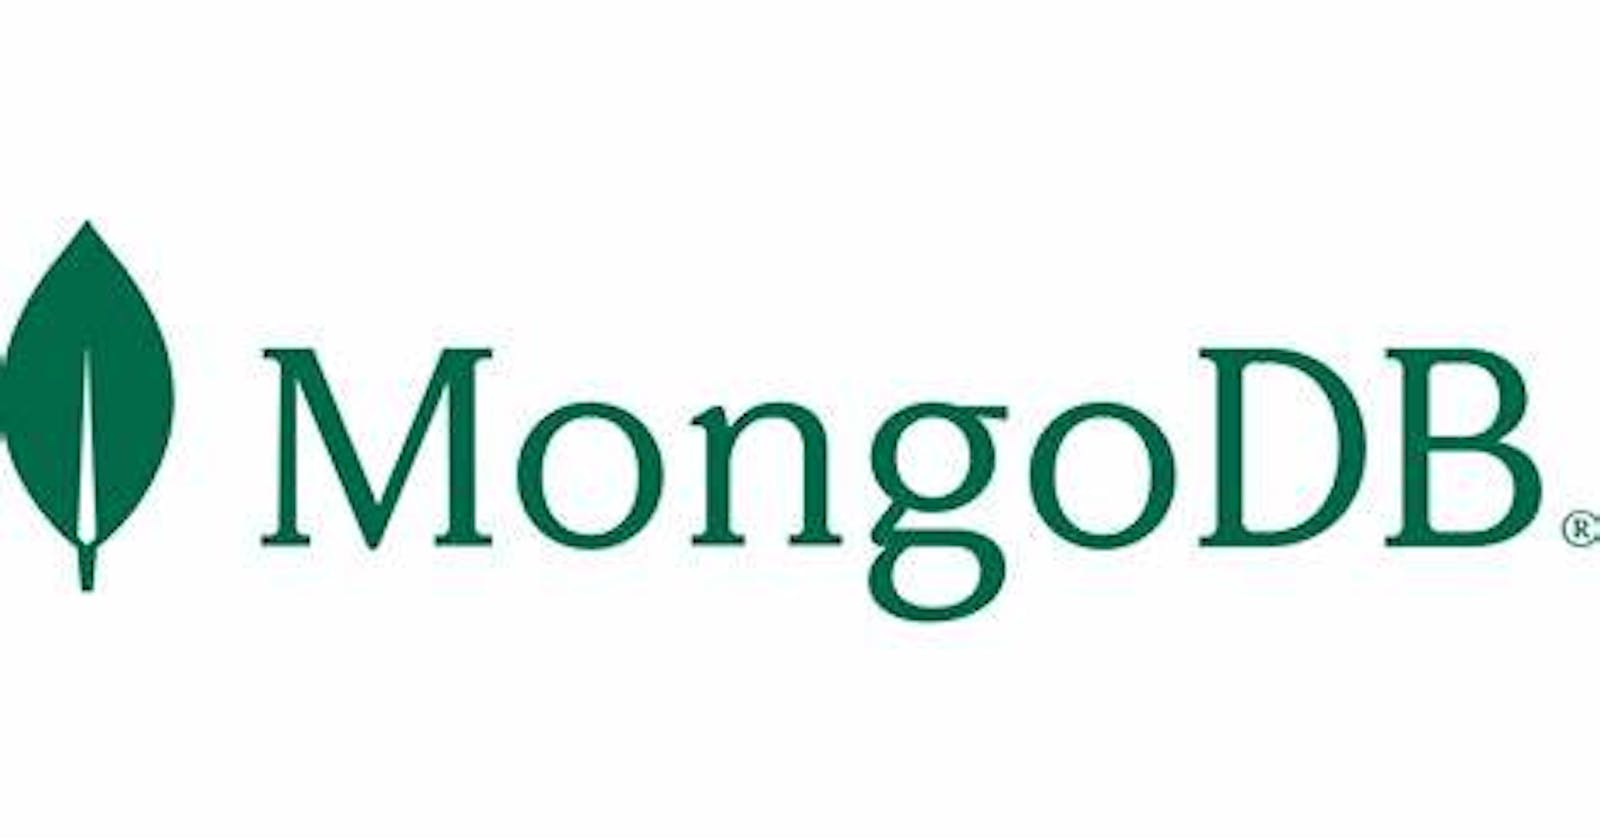 Everything about MongoDB